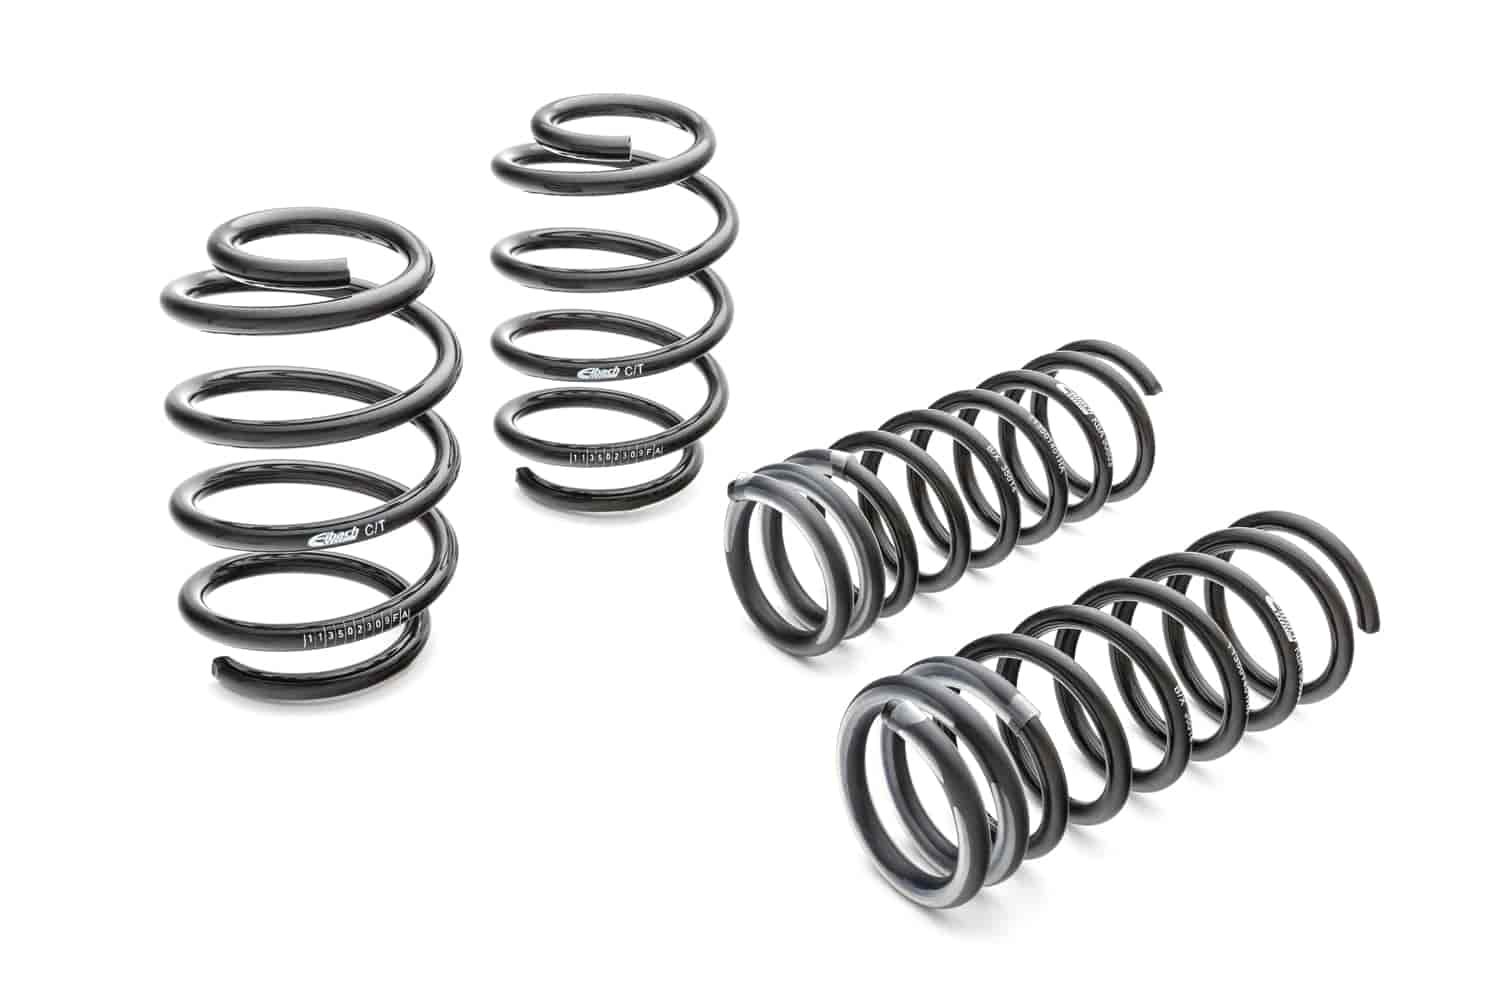 35140.140 Pro-Kit Lowering Springs 2013 Ford Focus ST - 1 in. Front/1.200 in. Rear Drop